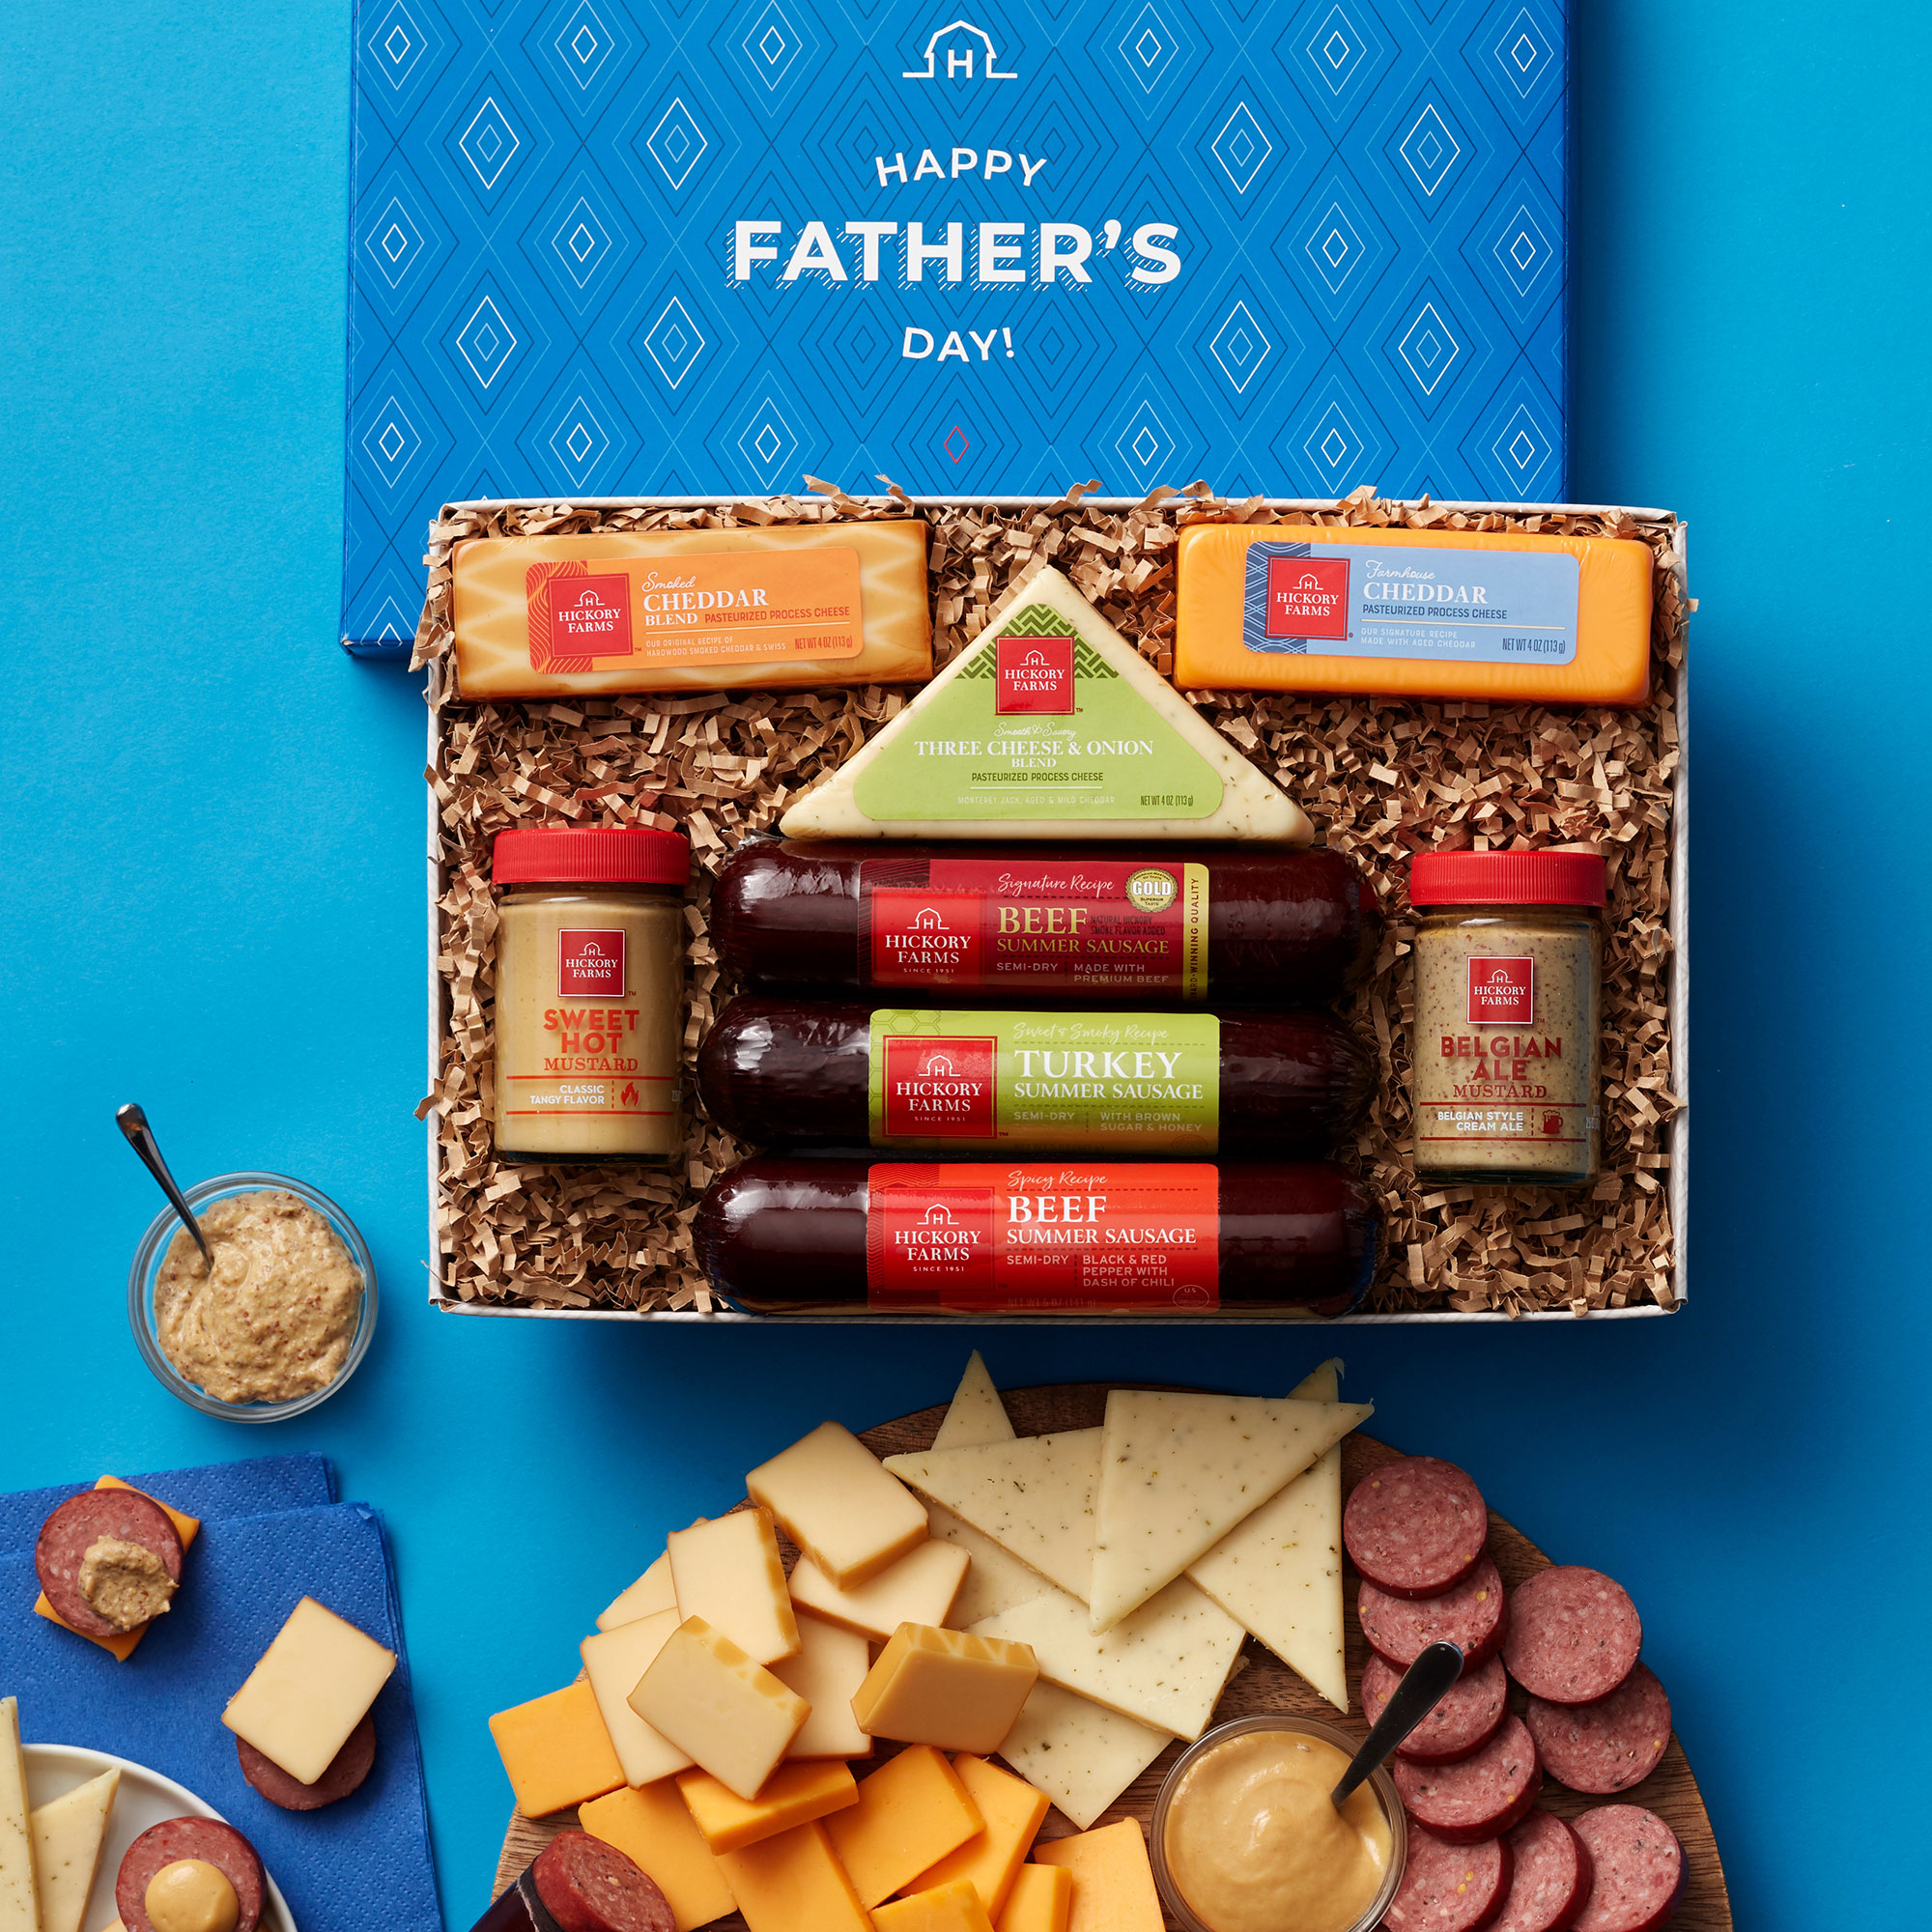 https://www.hickoryfarms.com/on/demandware.static/-/Sites-Web-Master-Catalog/default/dwf889a25f/images/products/fathers-day-hearty-bites-gift-box-006799-1.jpg